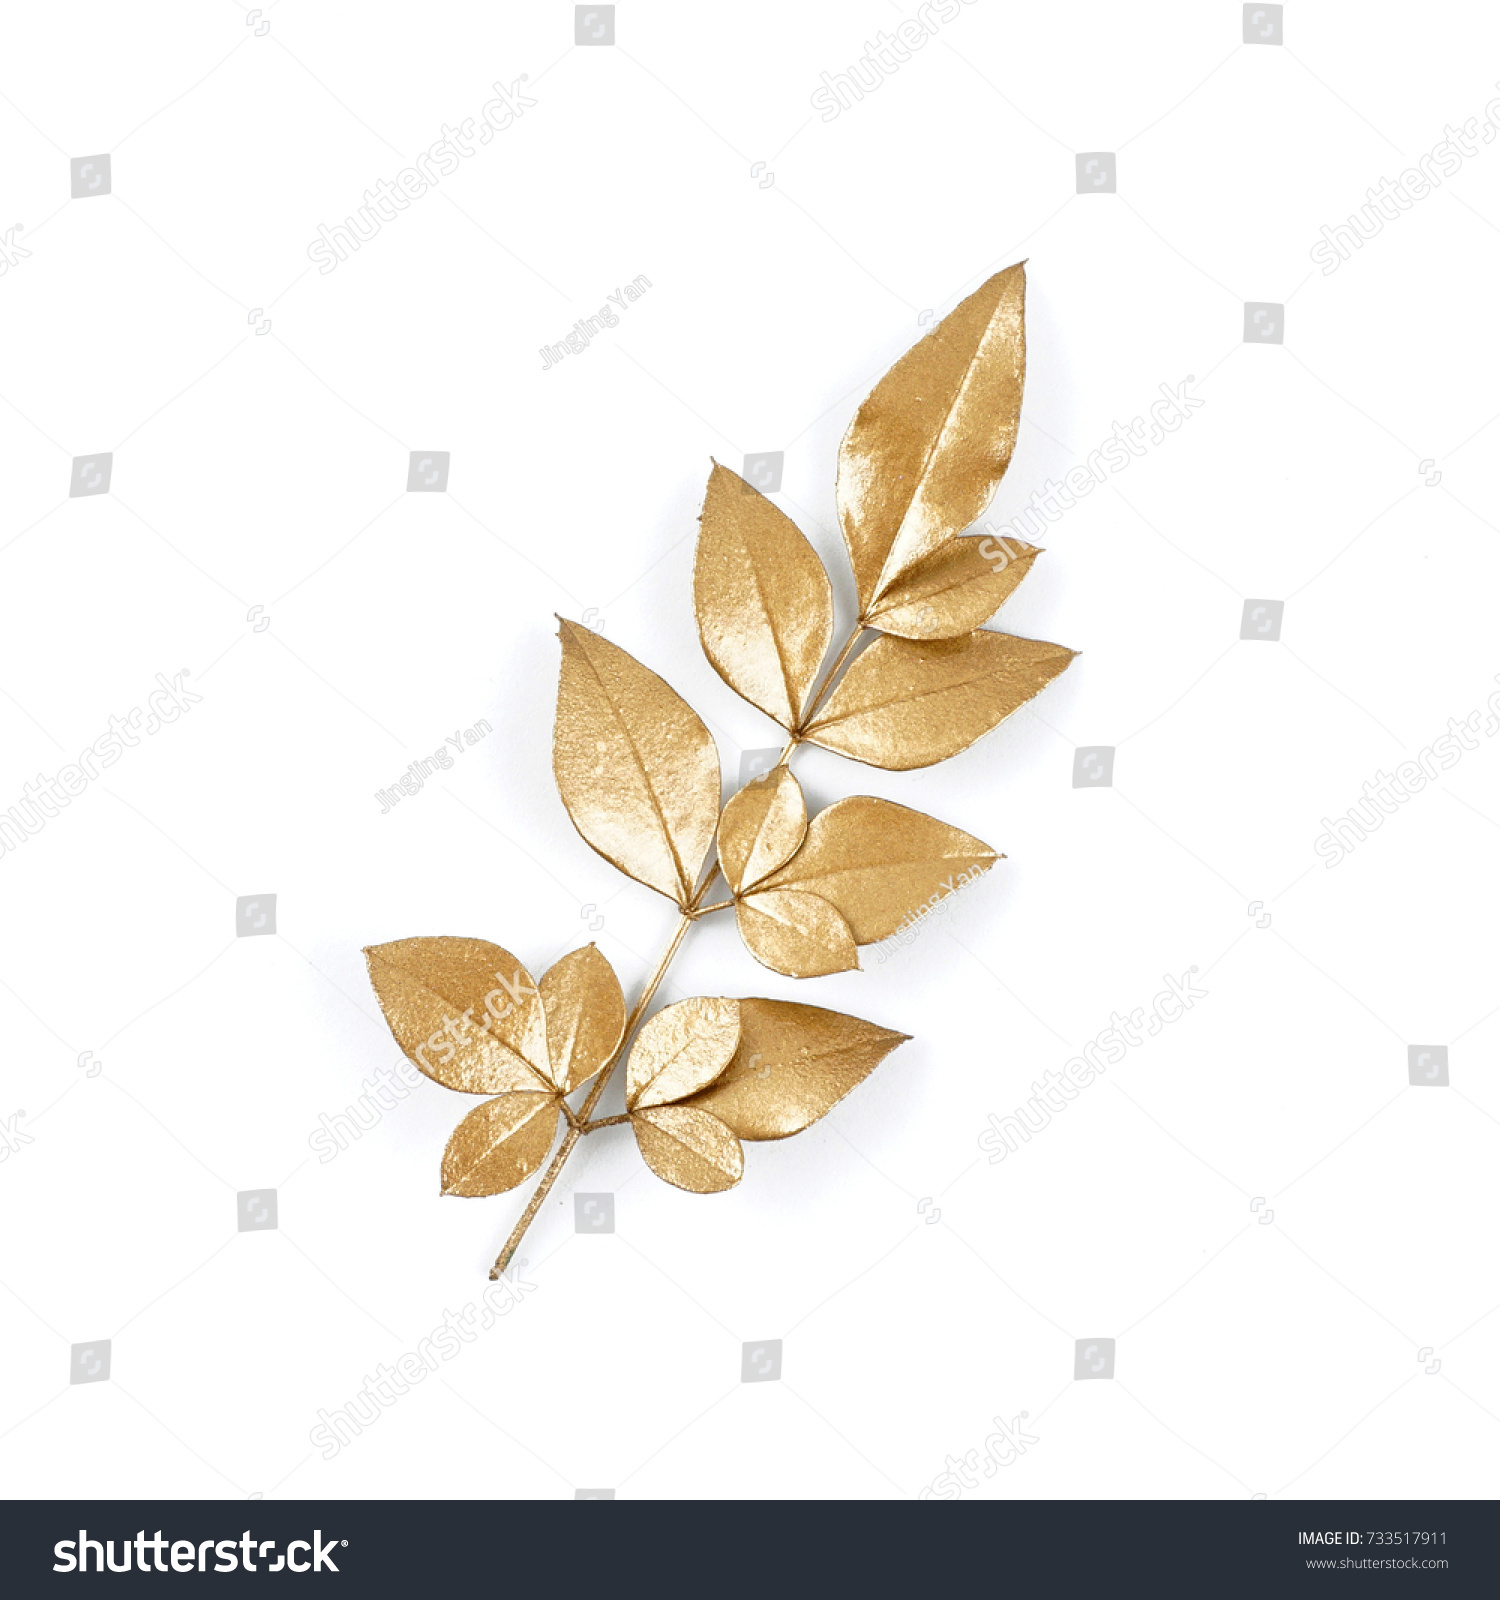 golden leaf design elements. Decoration elements for invitation, wedding cards, valentines day, greeting cards. Isolated. #733517911